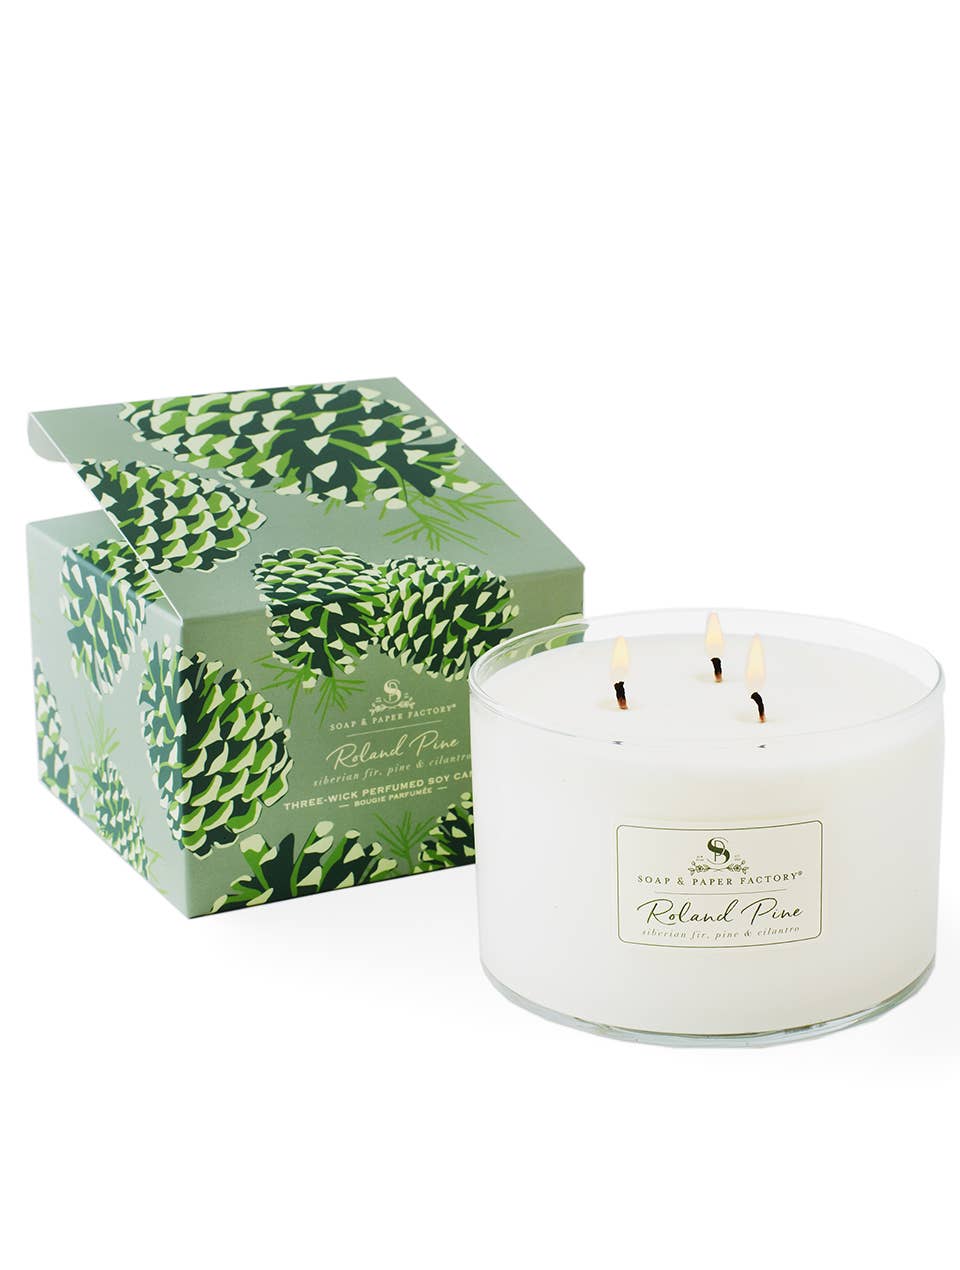 Soap & Paper Factory - Roland Pine Three-Wick Soy Candle